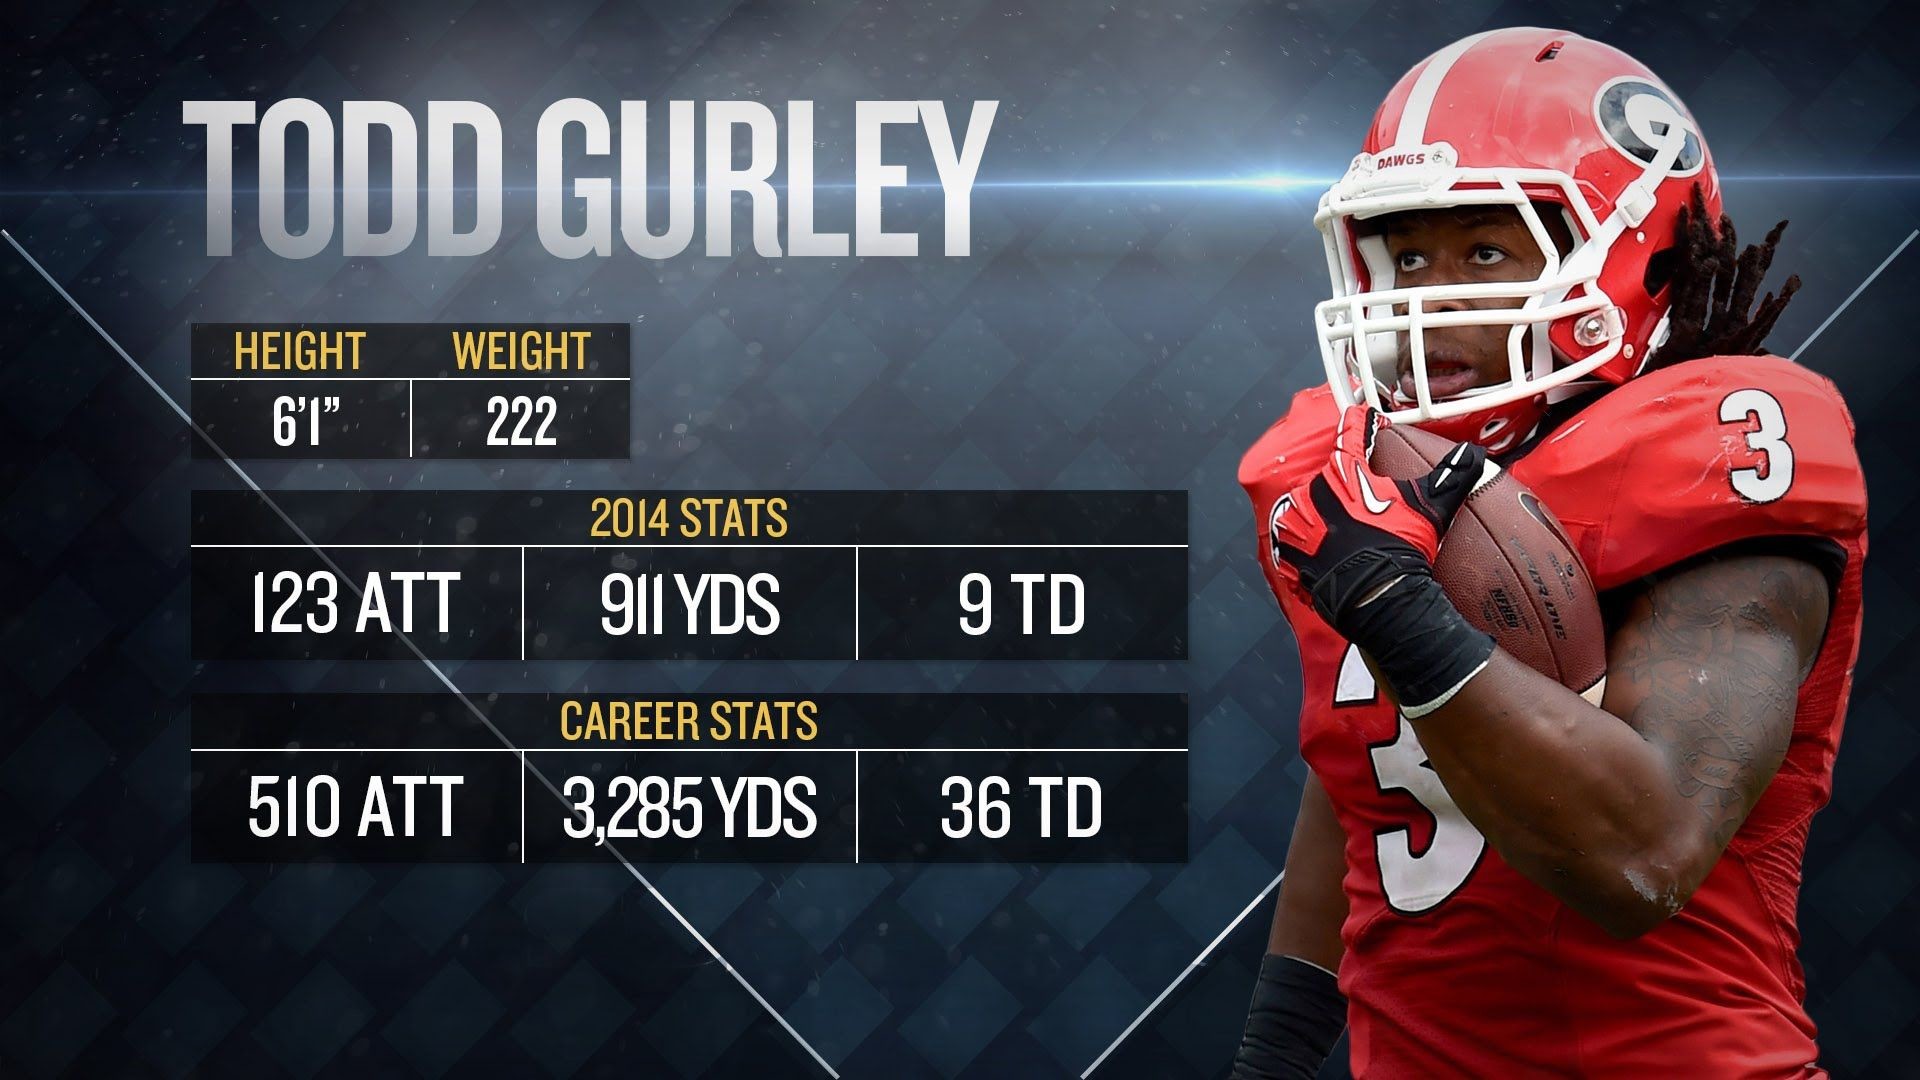 1920x1080 2015 NFL Draft: Todd Gurley scouting report - YouTube